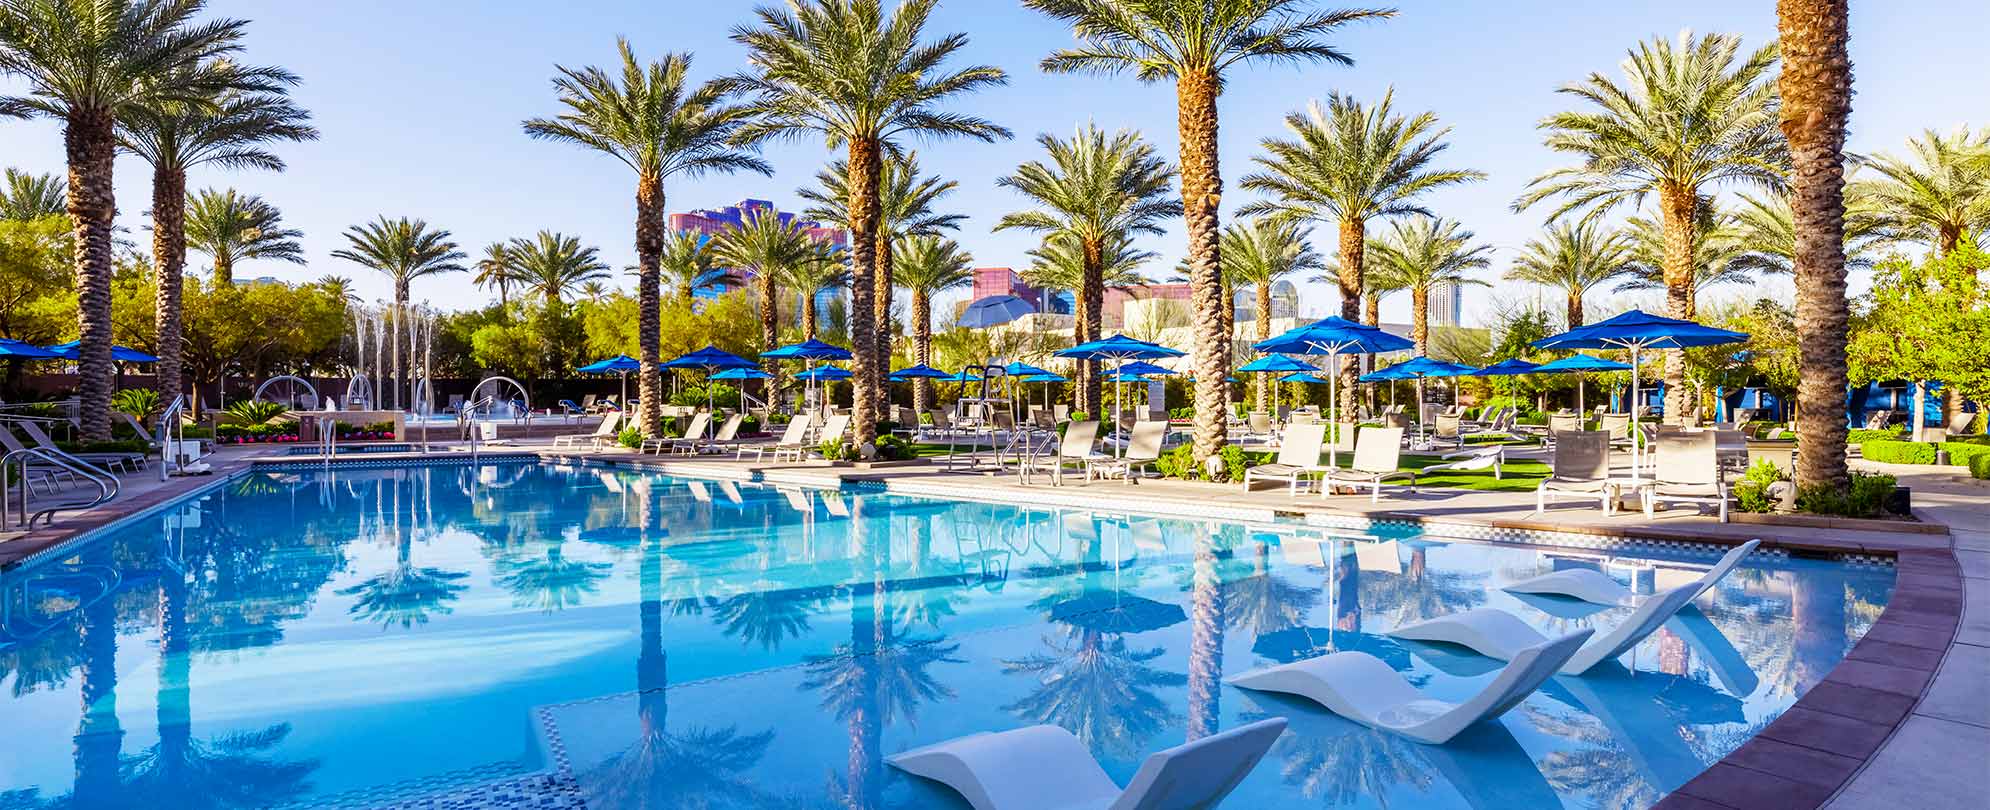 Large pool surrounded by palm trees at Margaritaville Vacation Club by Wyndham - Desert Blue in Las Vegas, NV.